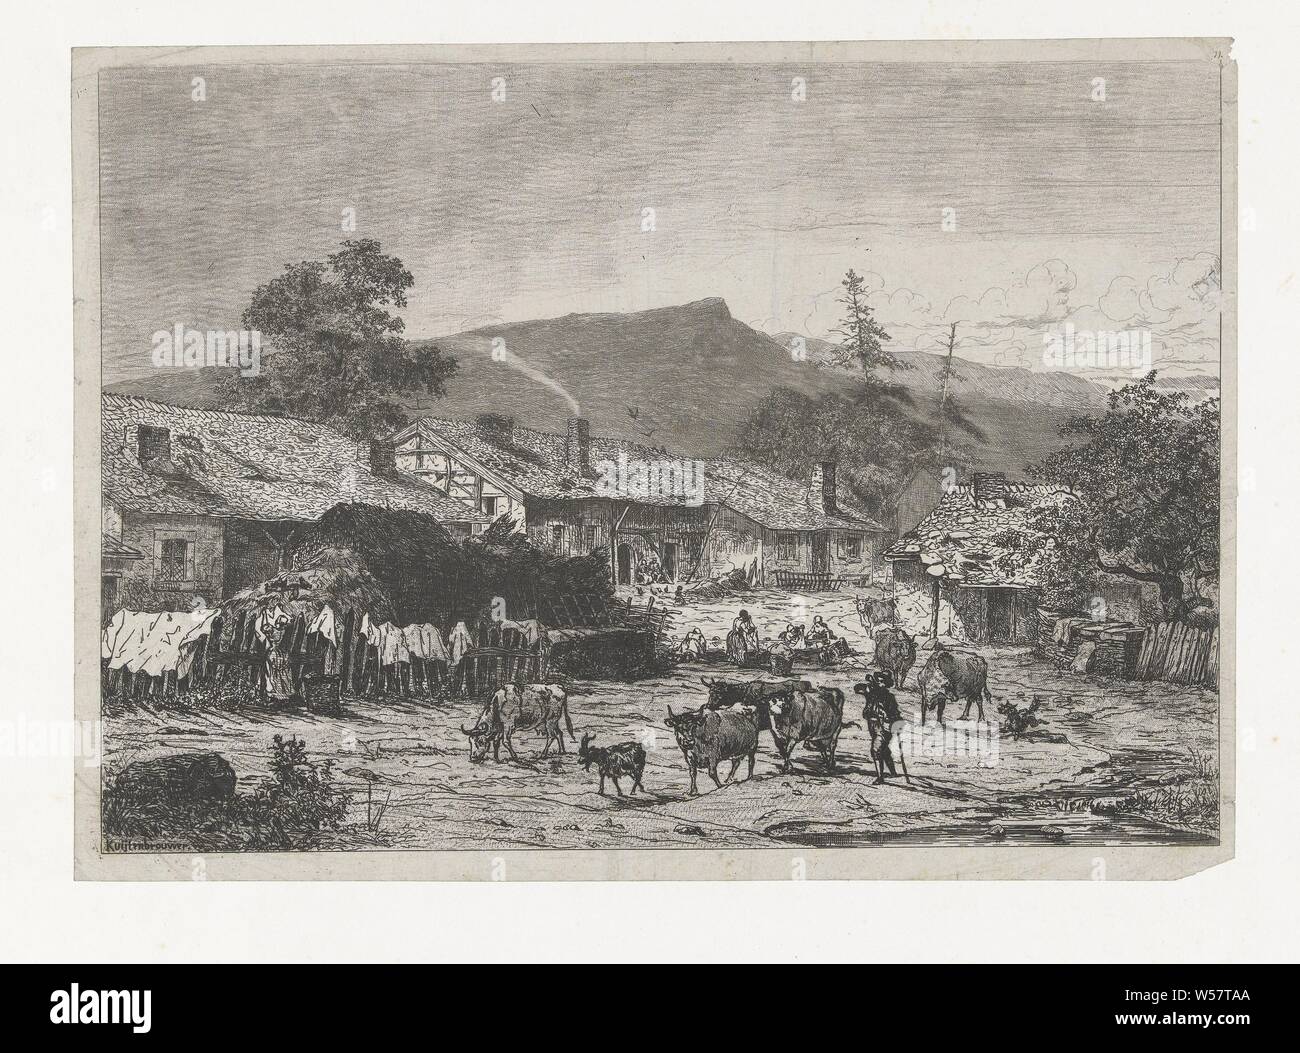 View of Mortehan, View of the Belgian village of Mortehan. In the foreground a shepherd blowing on a cow horn with his herd of cows, a goat and a dog. To the left is a woman drying her laundry on a fence and diagonally behind the haystack a group of women do the laundry. In the background you can see hills, cow, goat, dog, hanging the wash to dry, herding, herdsman, herdswoman, shepherd, shepherdess, cowherd, etc, low hill country, Martinus Antonius Kuytenbrouwer jr. (mentioned on object), Netherlands, 1831 - 1897, paper, etching, h 265 mm × w 383 mm Stock Photo